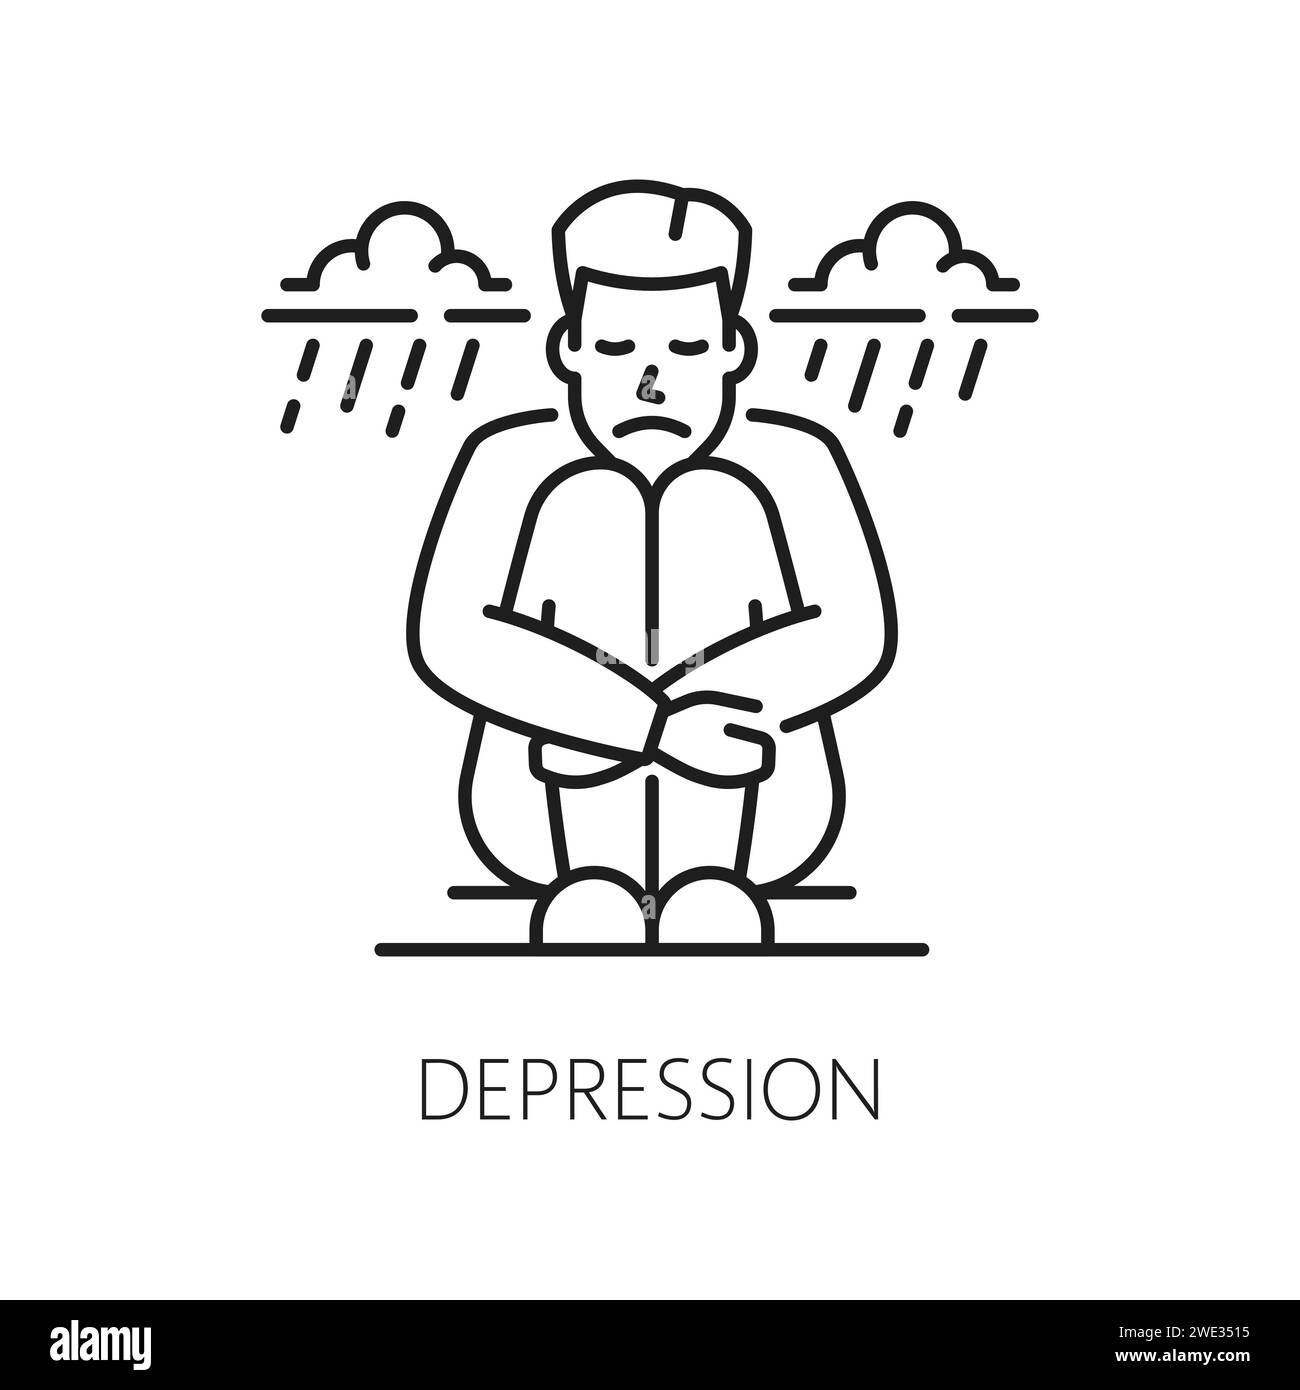 Depression, psychological disorder problem and mental health icon for ...